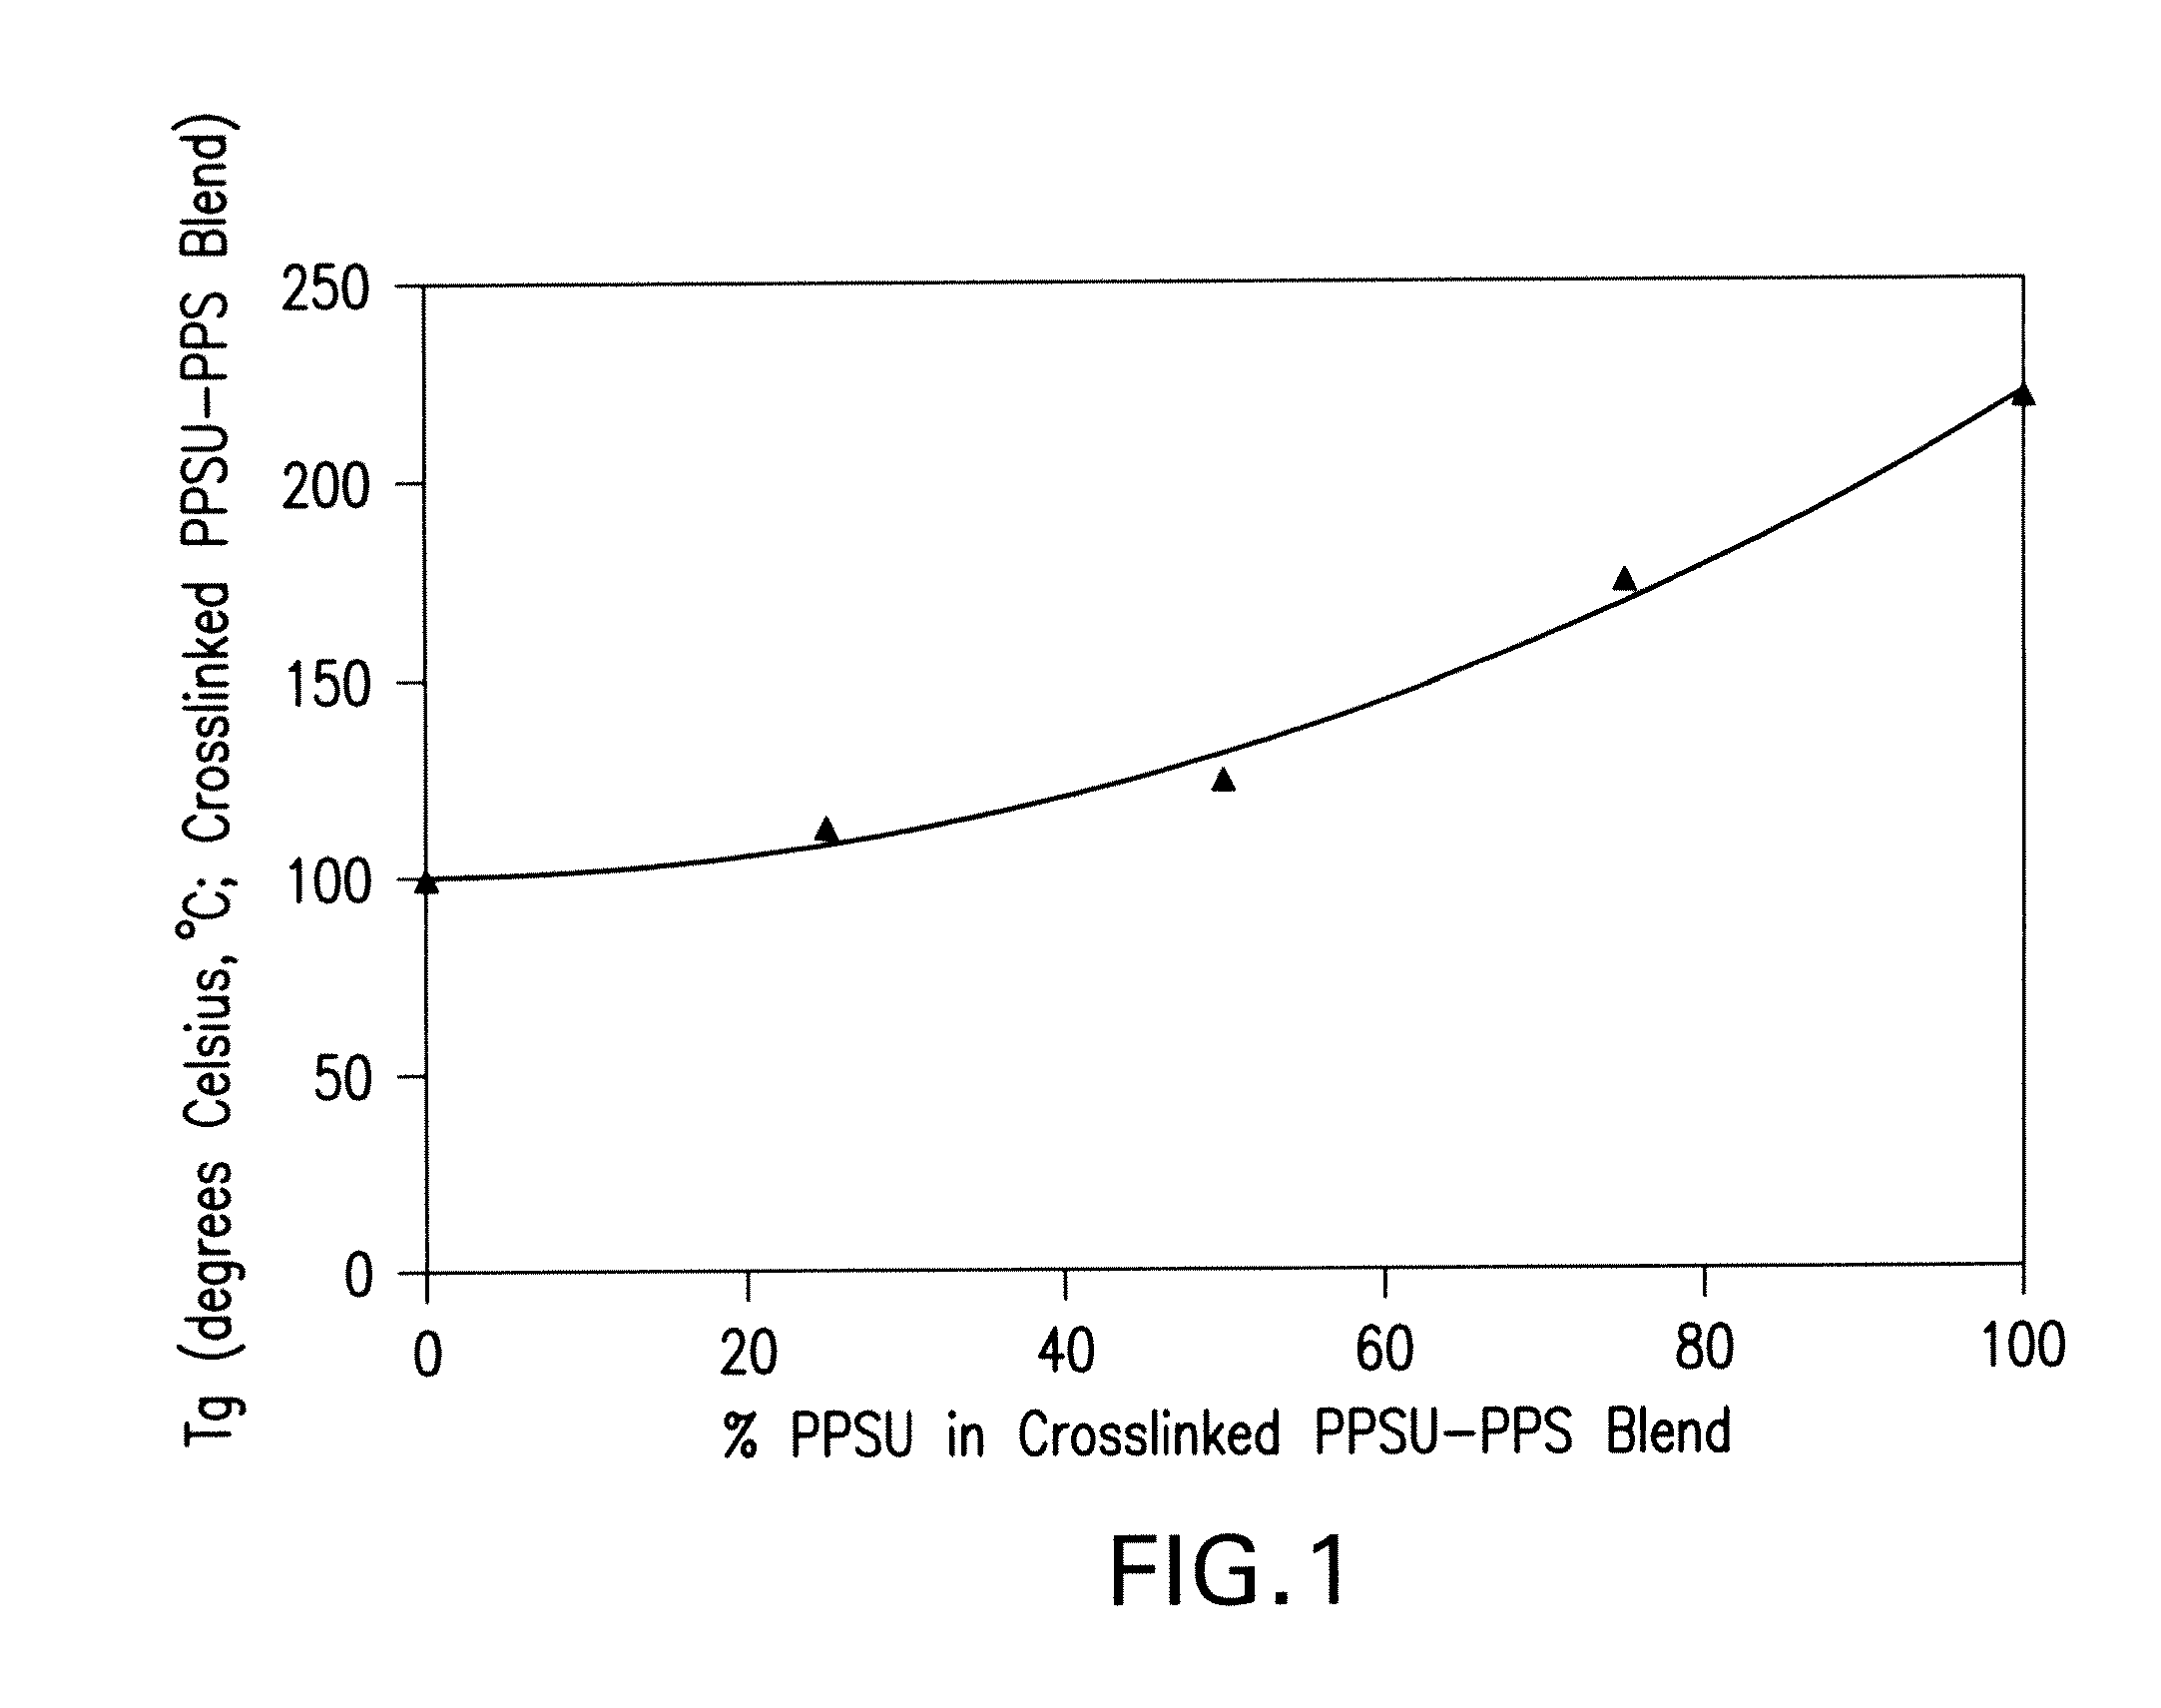 Crosslinked blends of polyphenylene sulfide and polyphenylsulfone for downhole applications, methods of manufacture, and uses thereof